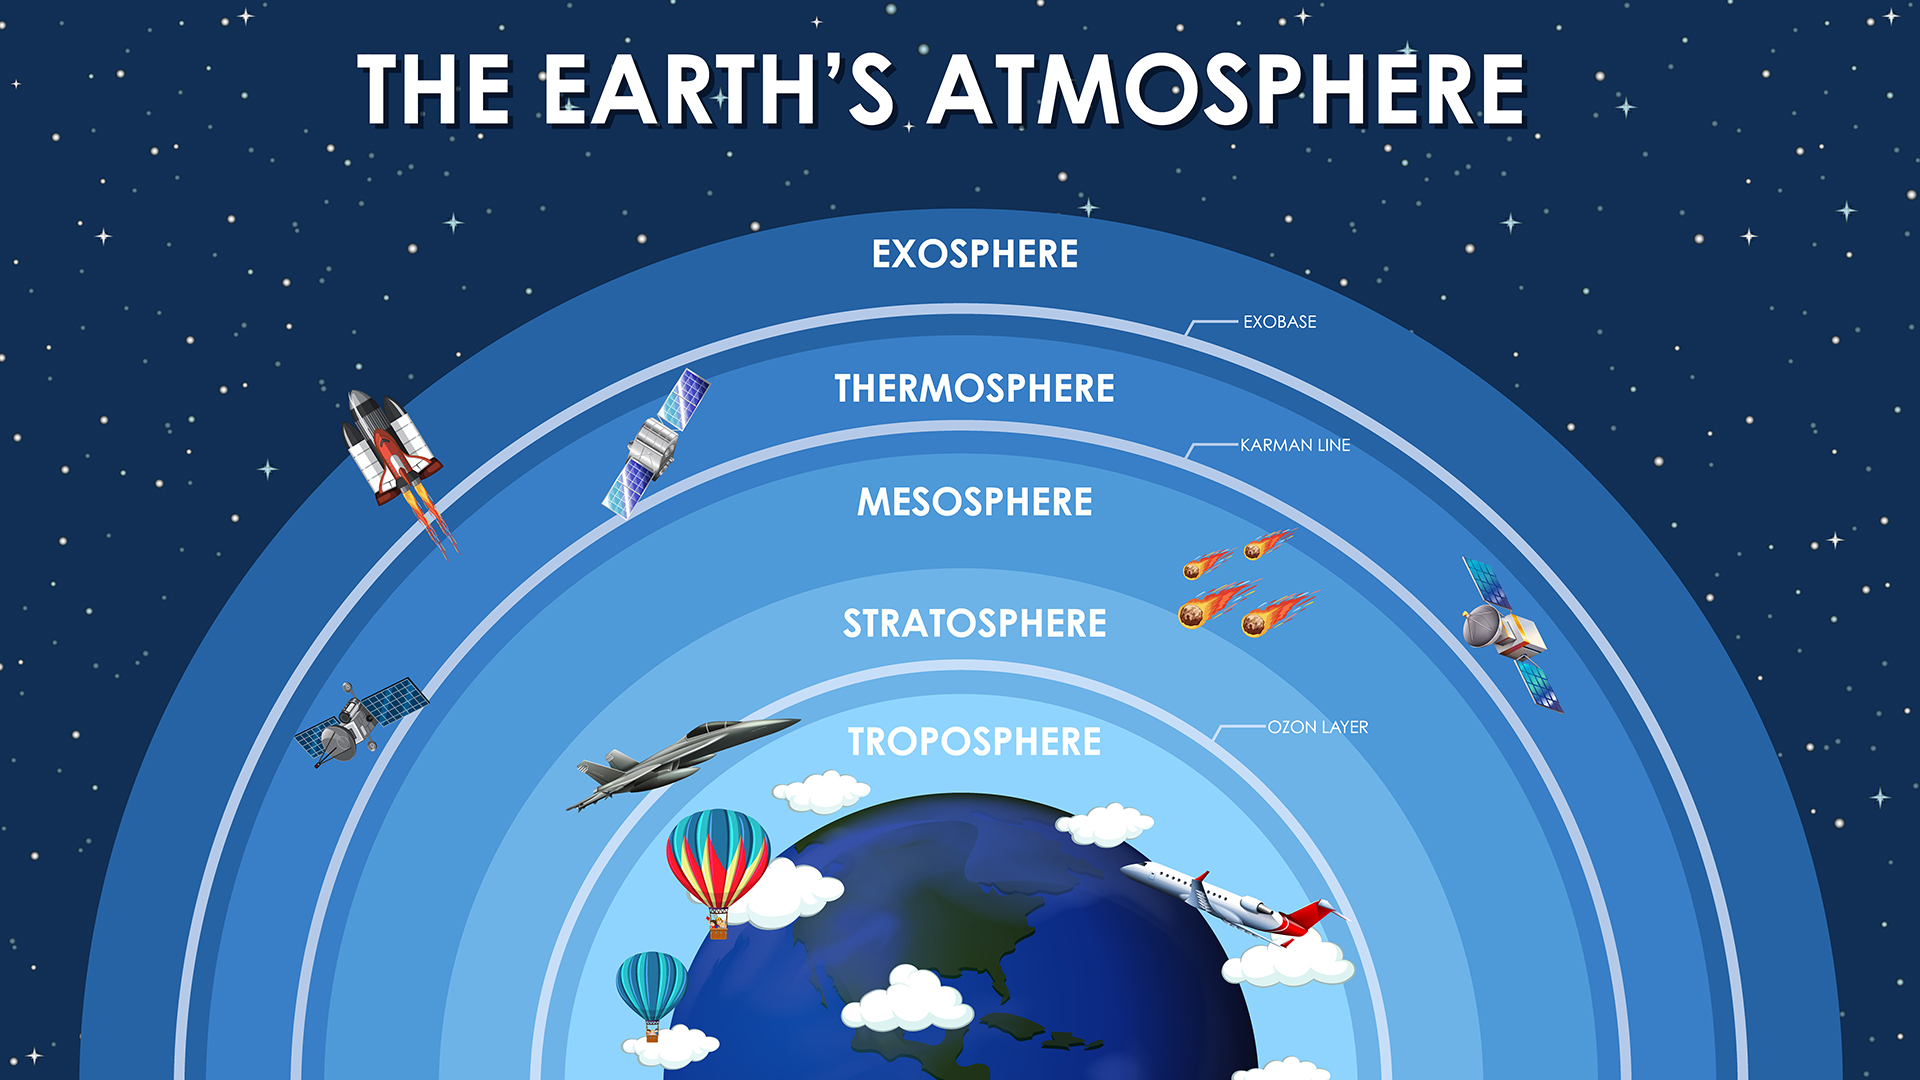 Illustration of Earth's Atmosphere